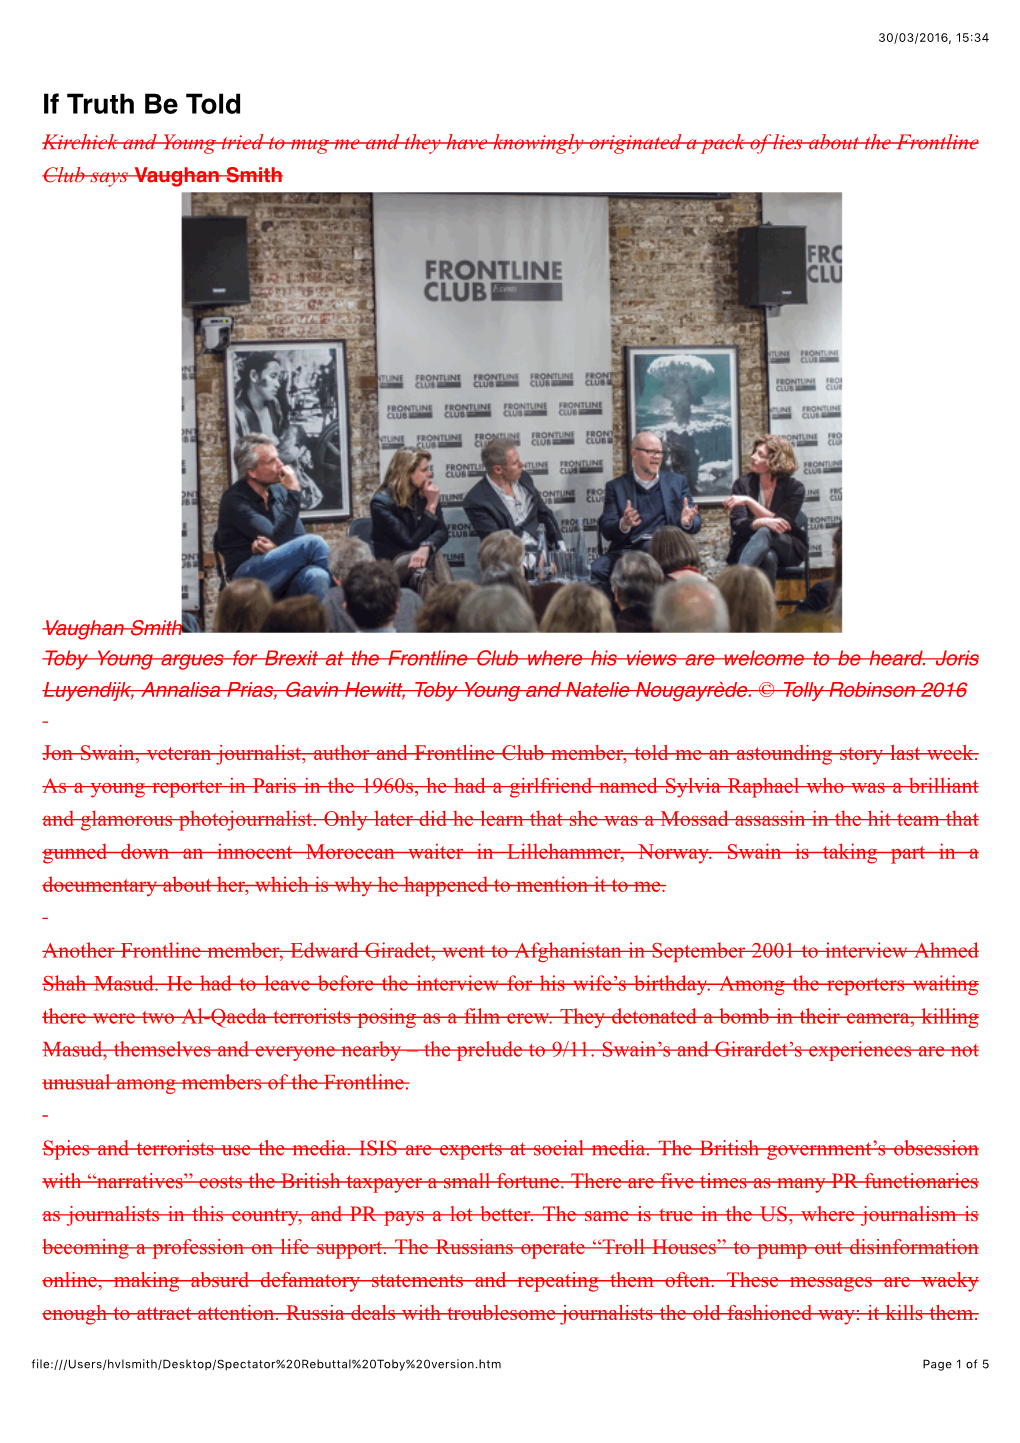 If Truth Be Told Kirchick and Young Tried to Mug Me and They Have Knowingly Originated a Pack of Lies About the Frontline Club Says Vaughan Smith